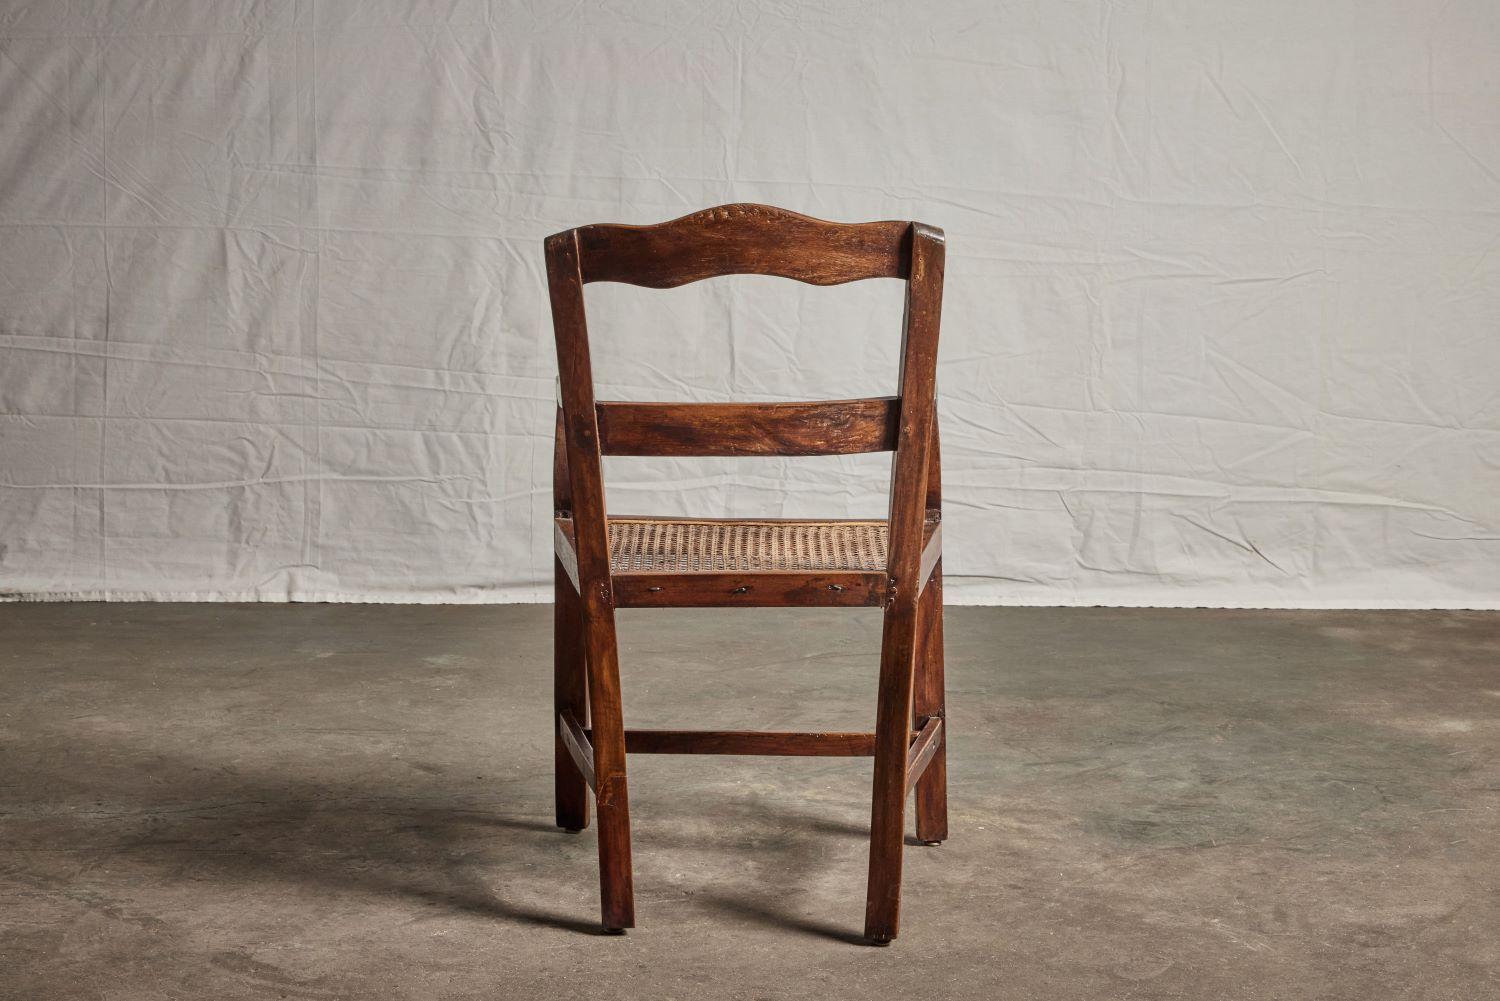 Chinese Philippine Nara Wood Arm Chair with Cane Seat